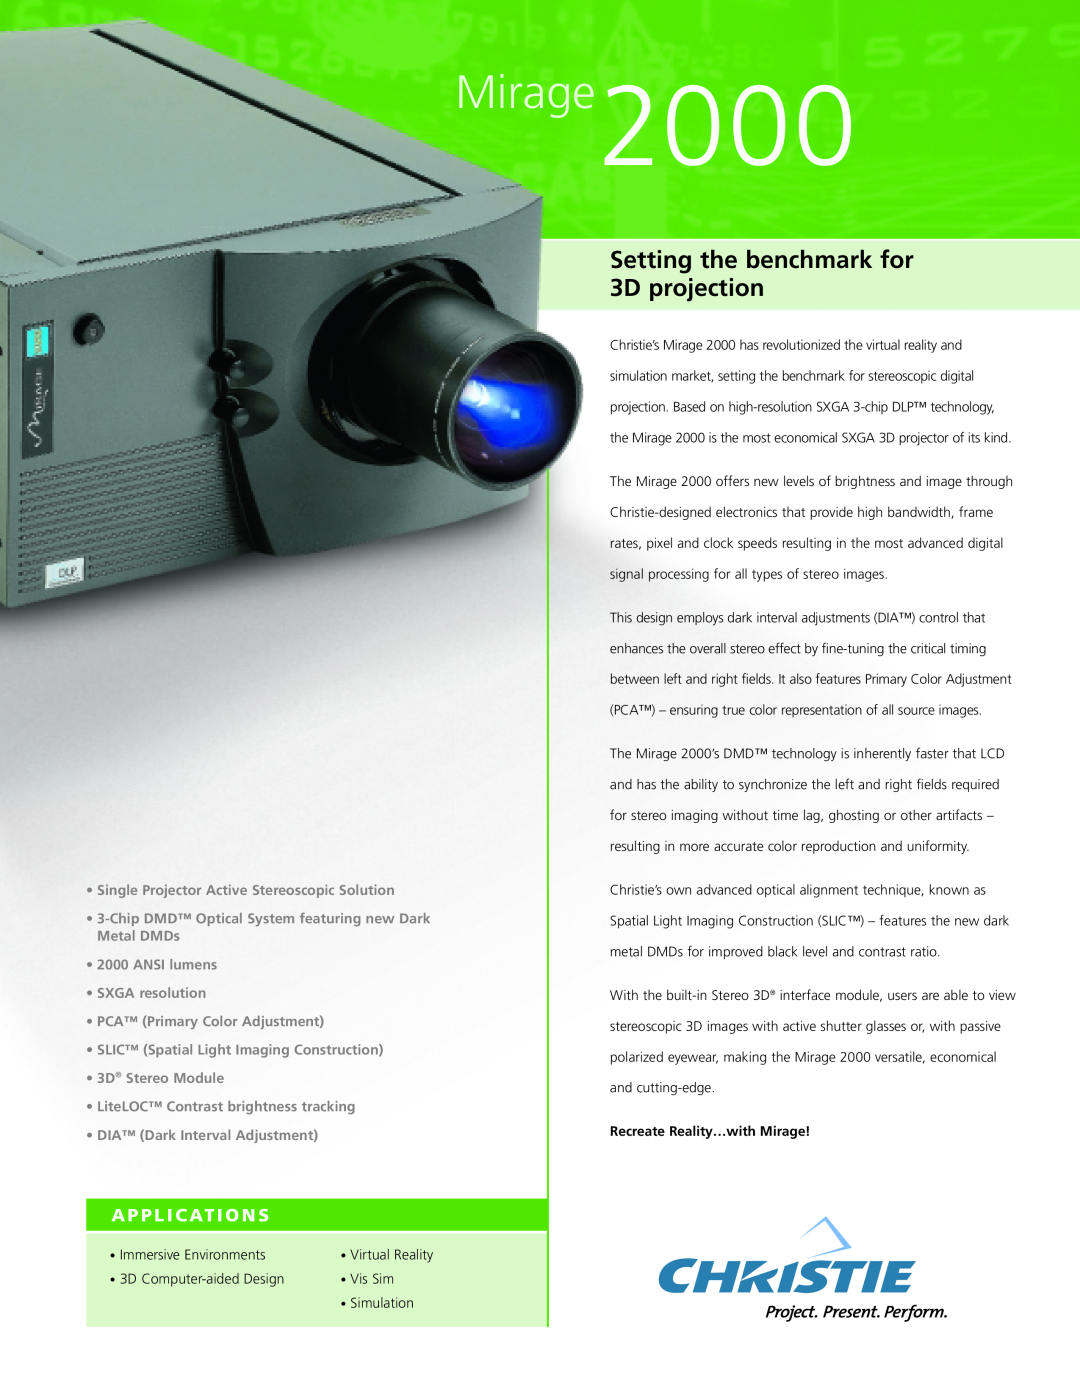 Christie Digital Systems manual A P P L I C At I O N S, Mirage2000, Setting the benchmark for 3D projection, Vis Sim 